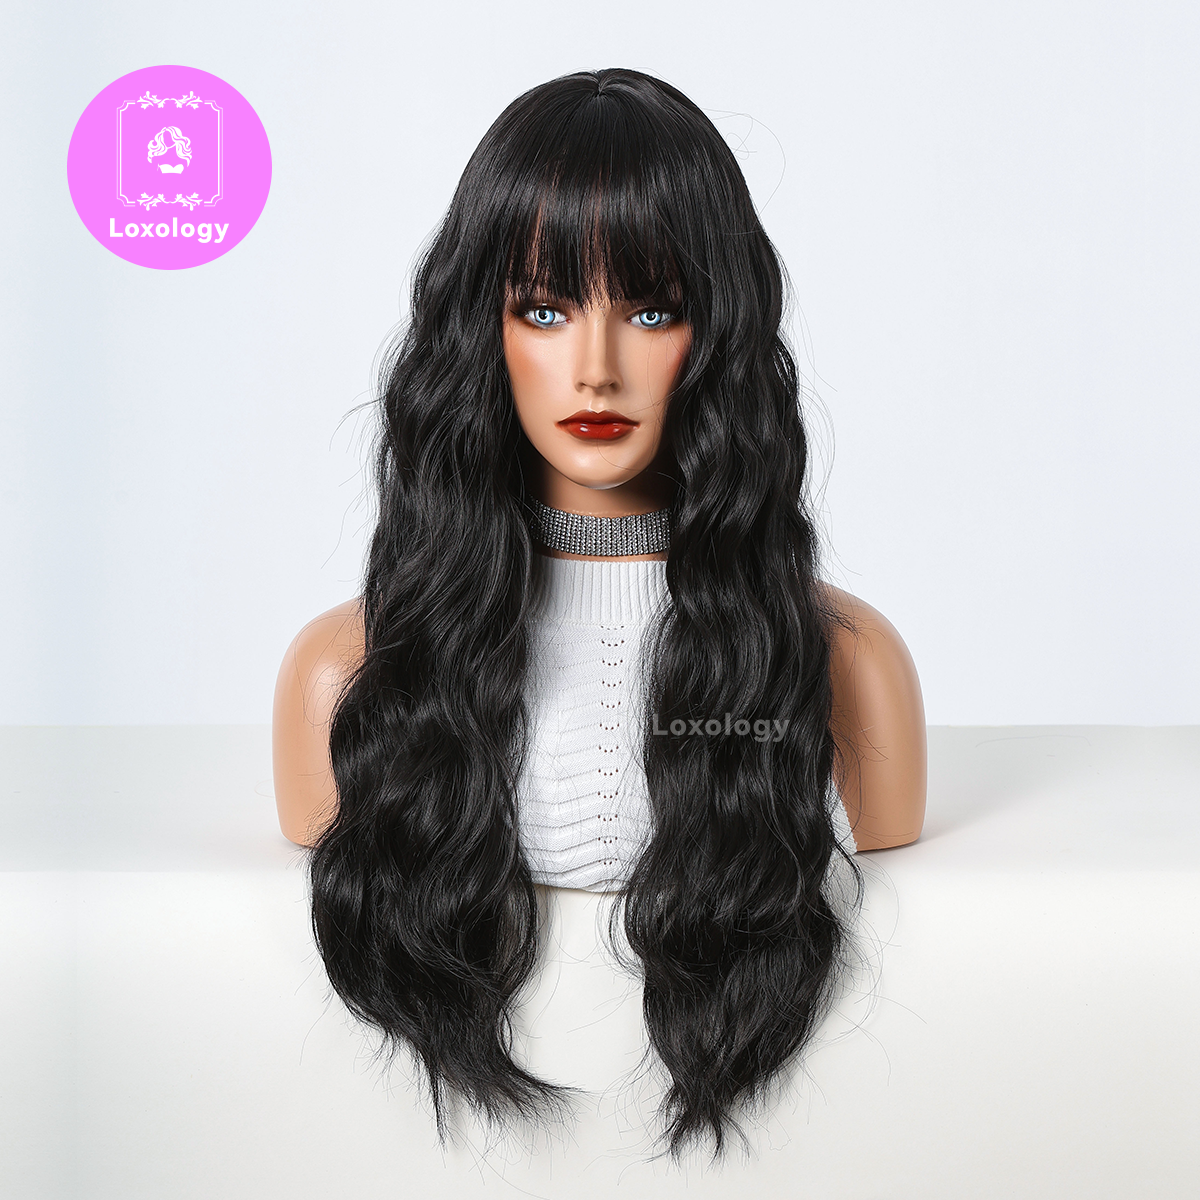 【Elsie】Loxology | 24 Inch long curly wigs black with bangs wigs